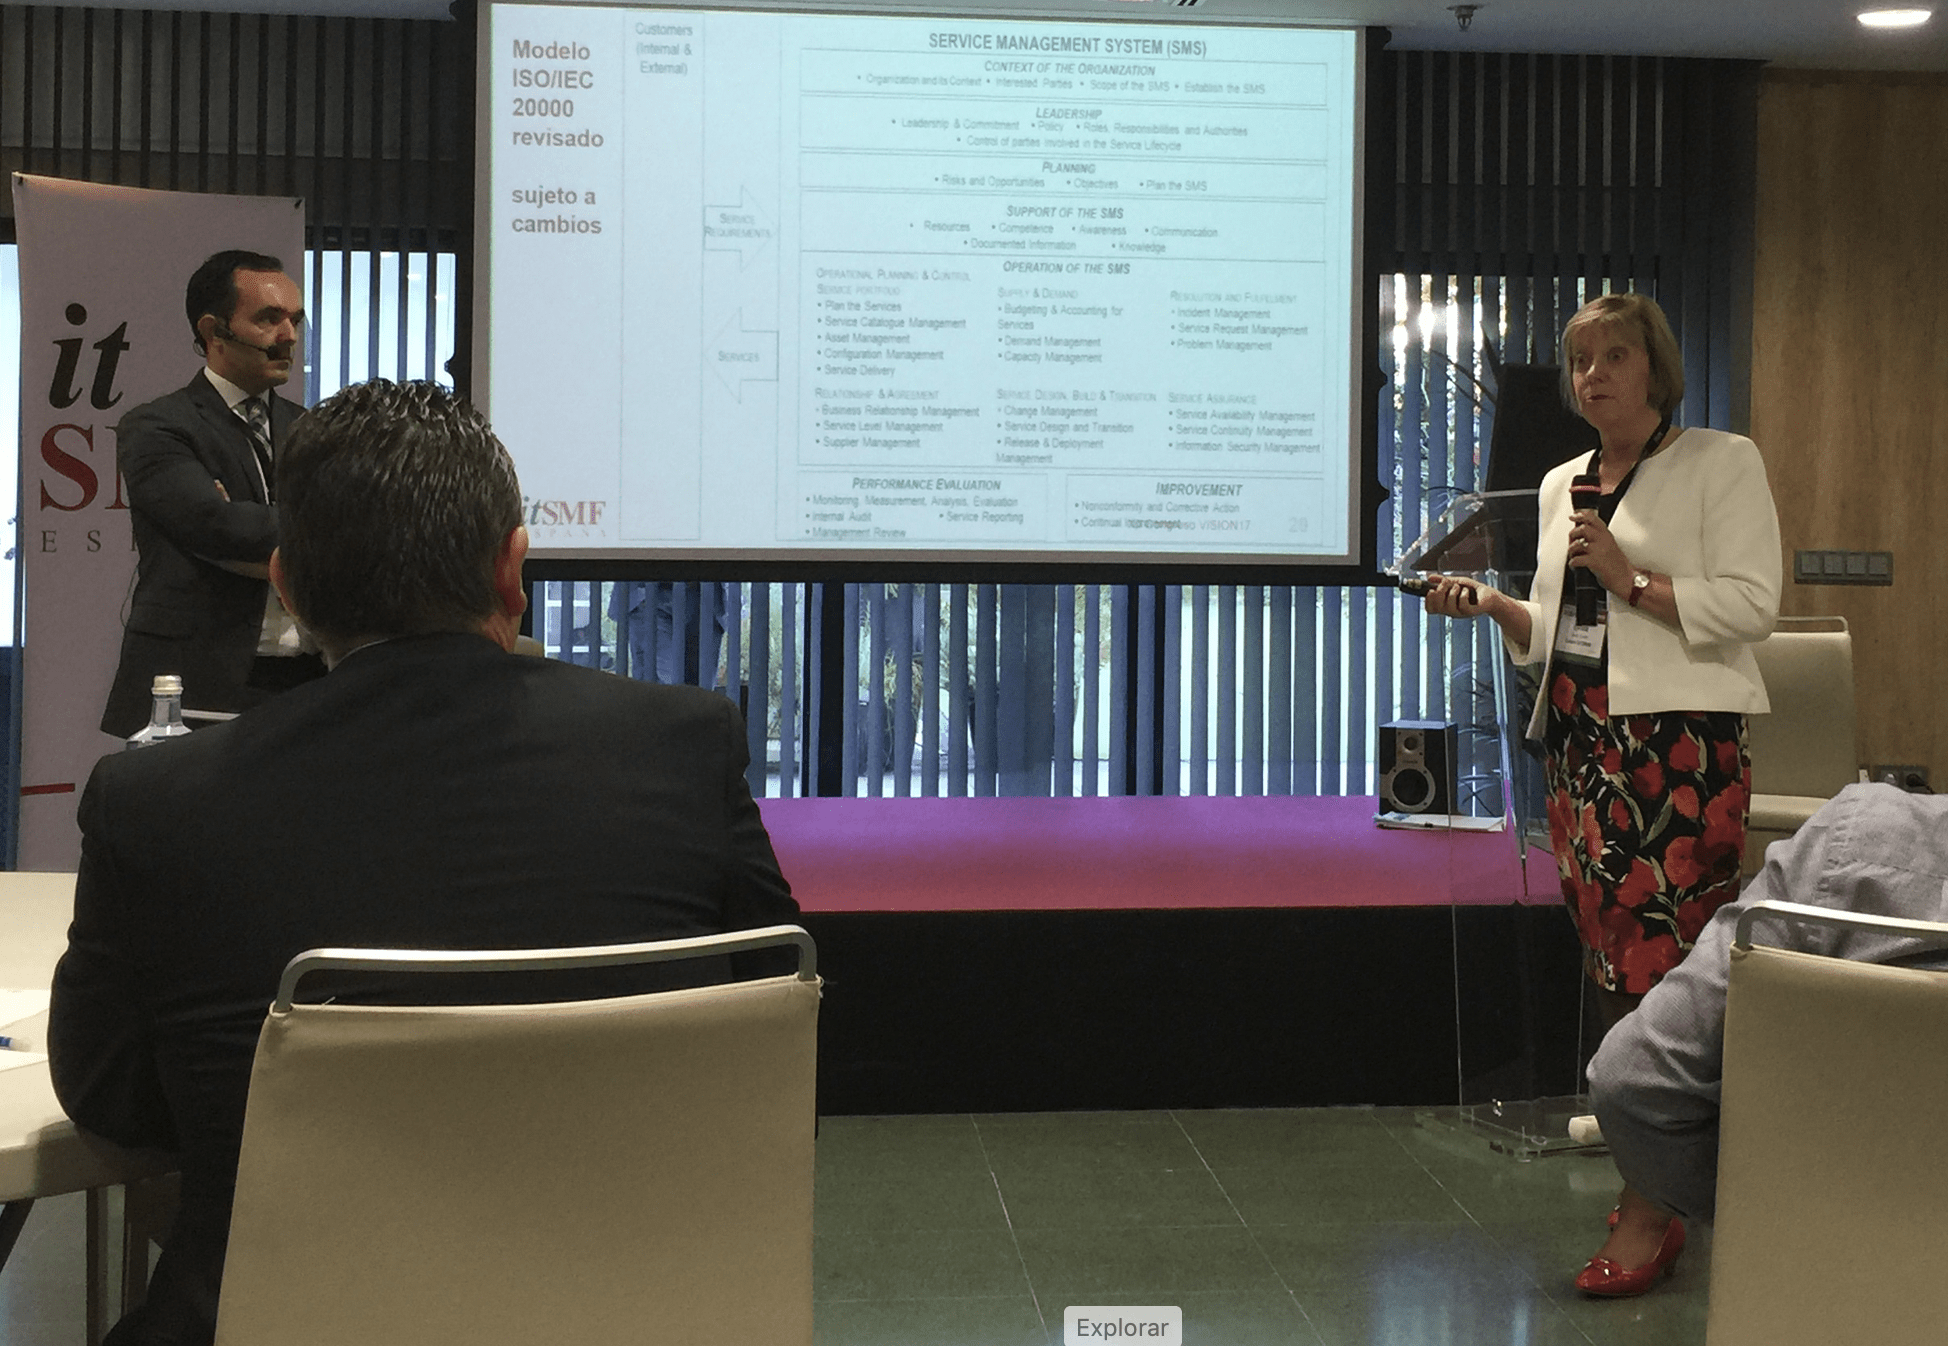 Diego Berea and Lynda Cooper explain the main features of the ISO/IEC 20000-1:2018